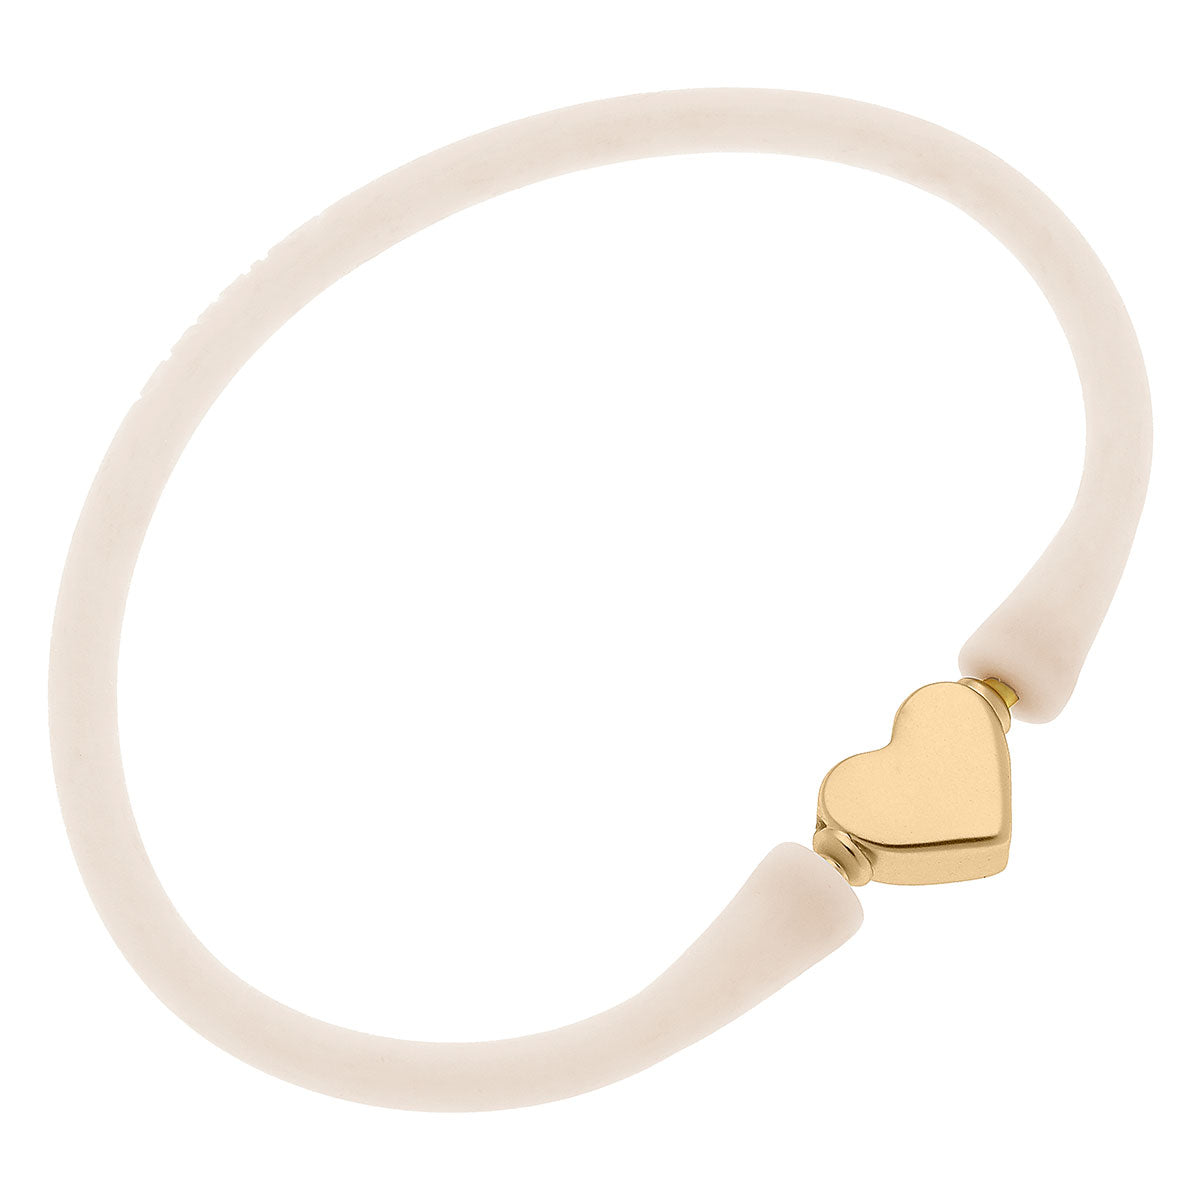 Gold heart charm with ivory silicone band bracelet